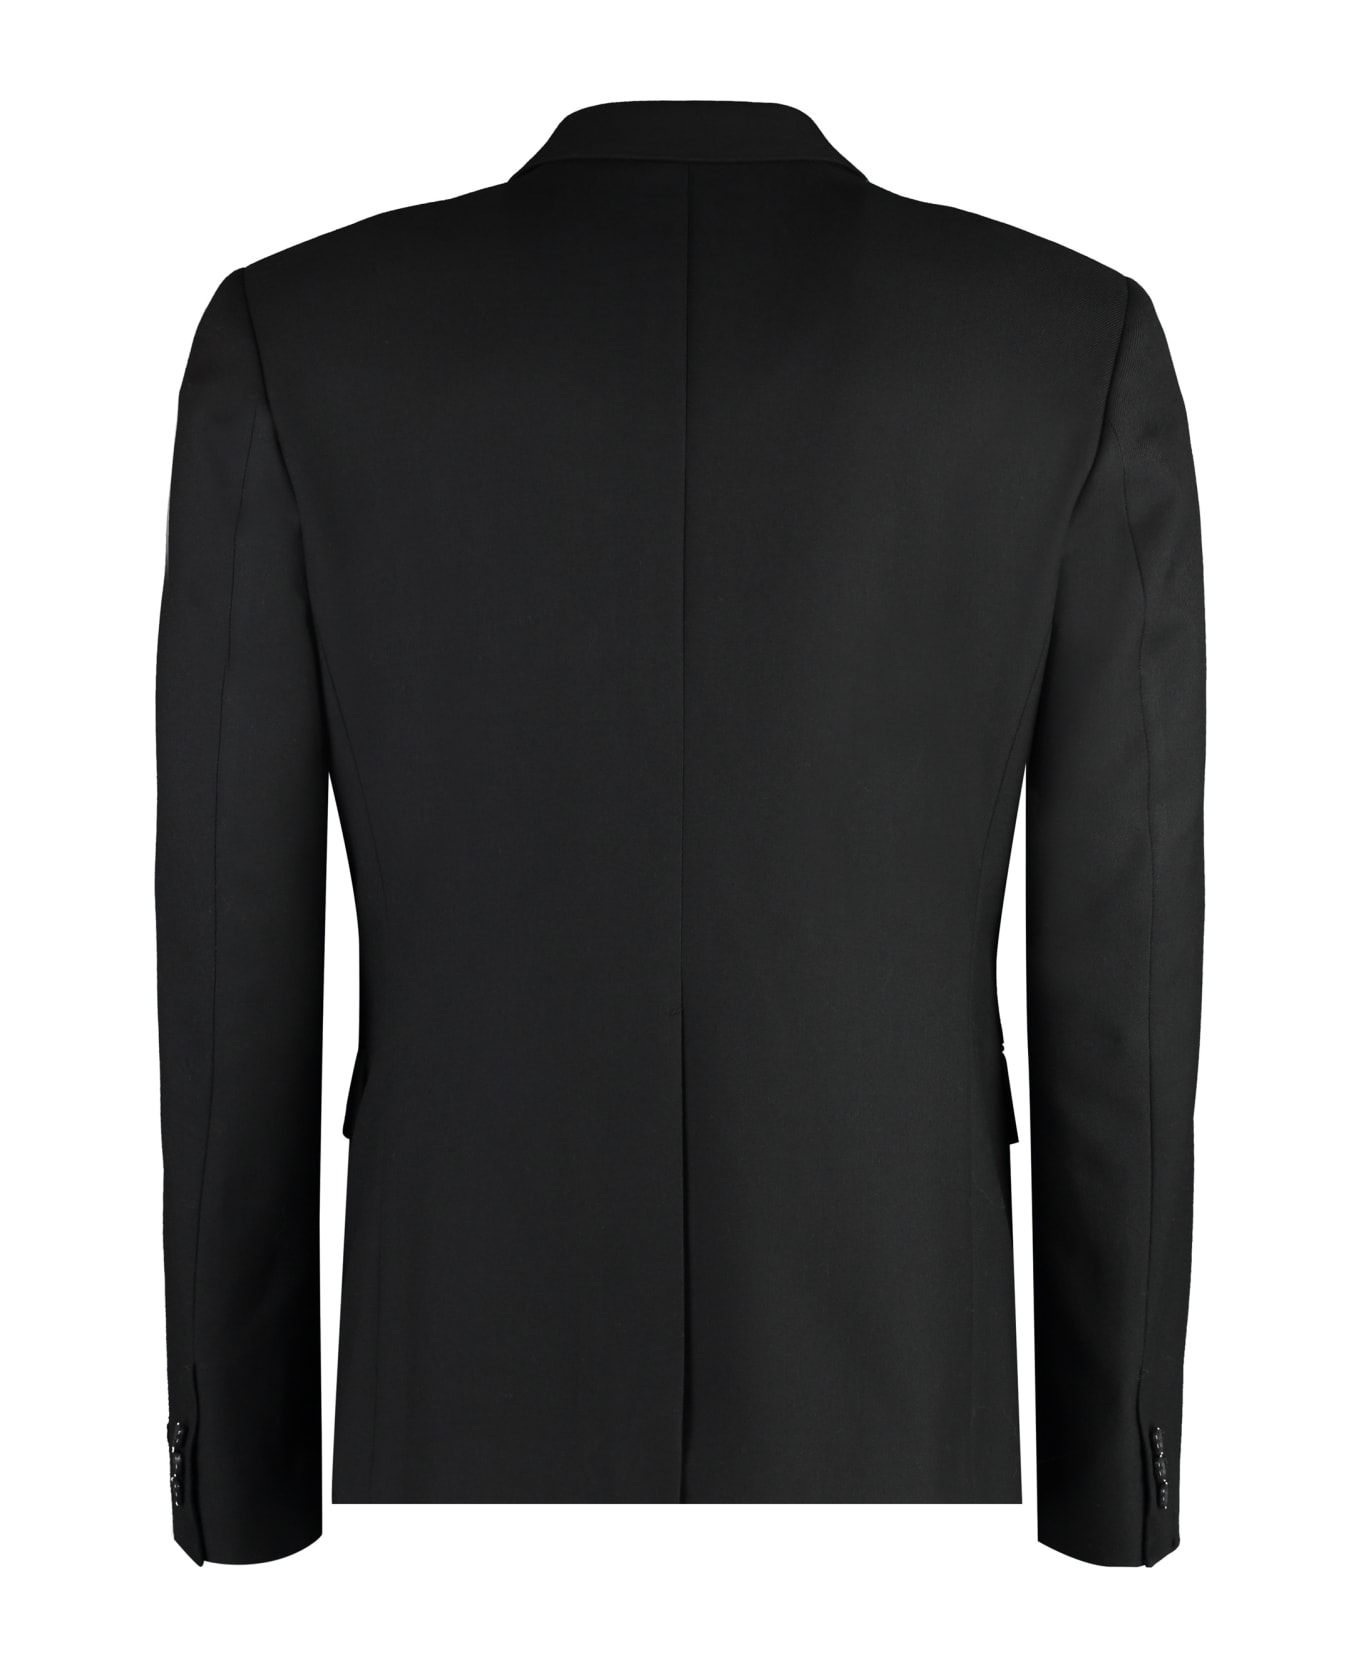 Versace Double-breasted Wool Blazer - black ブレザー